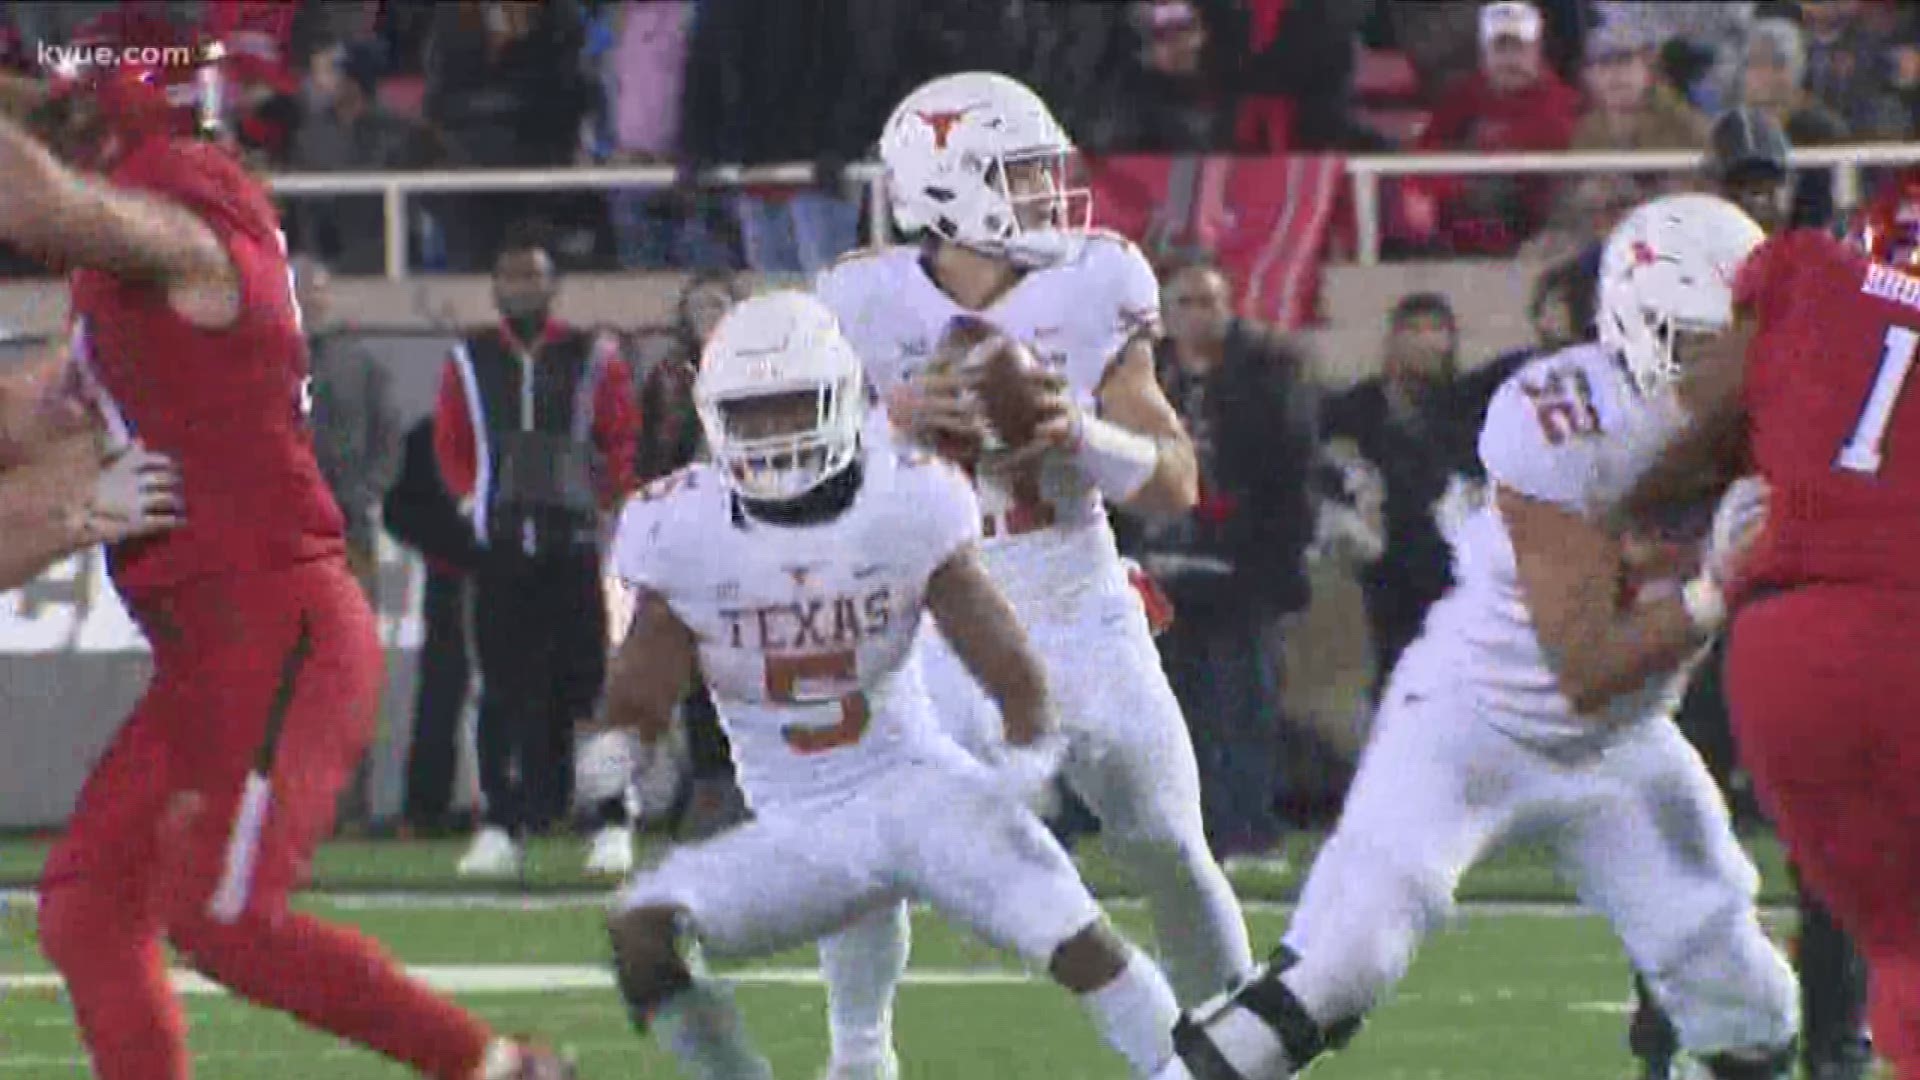 Saturday's game against Iowa State will be one of the coldest ones for the Texas Longhorns since 2018's showdown at Texas Tech, according to the team.